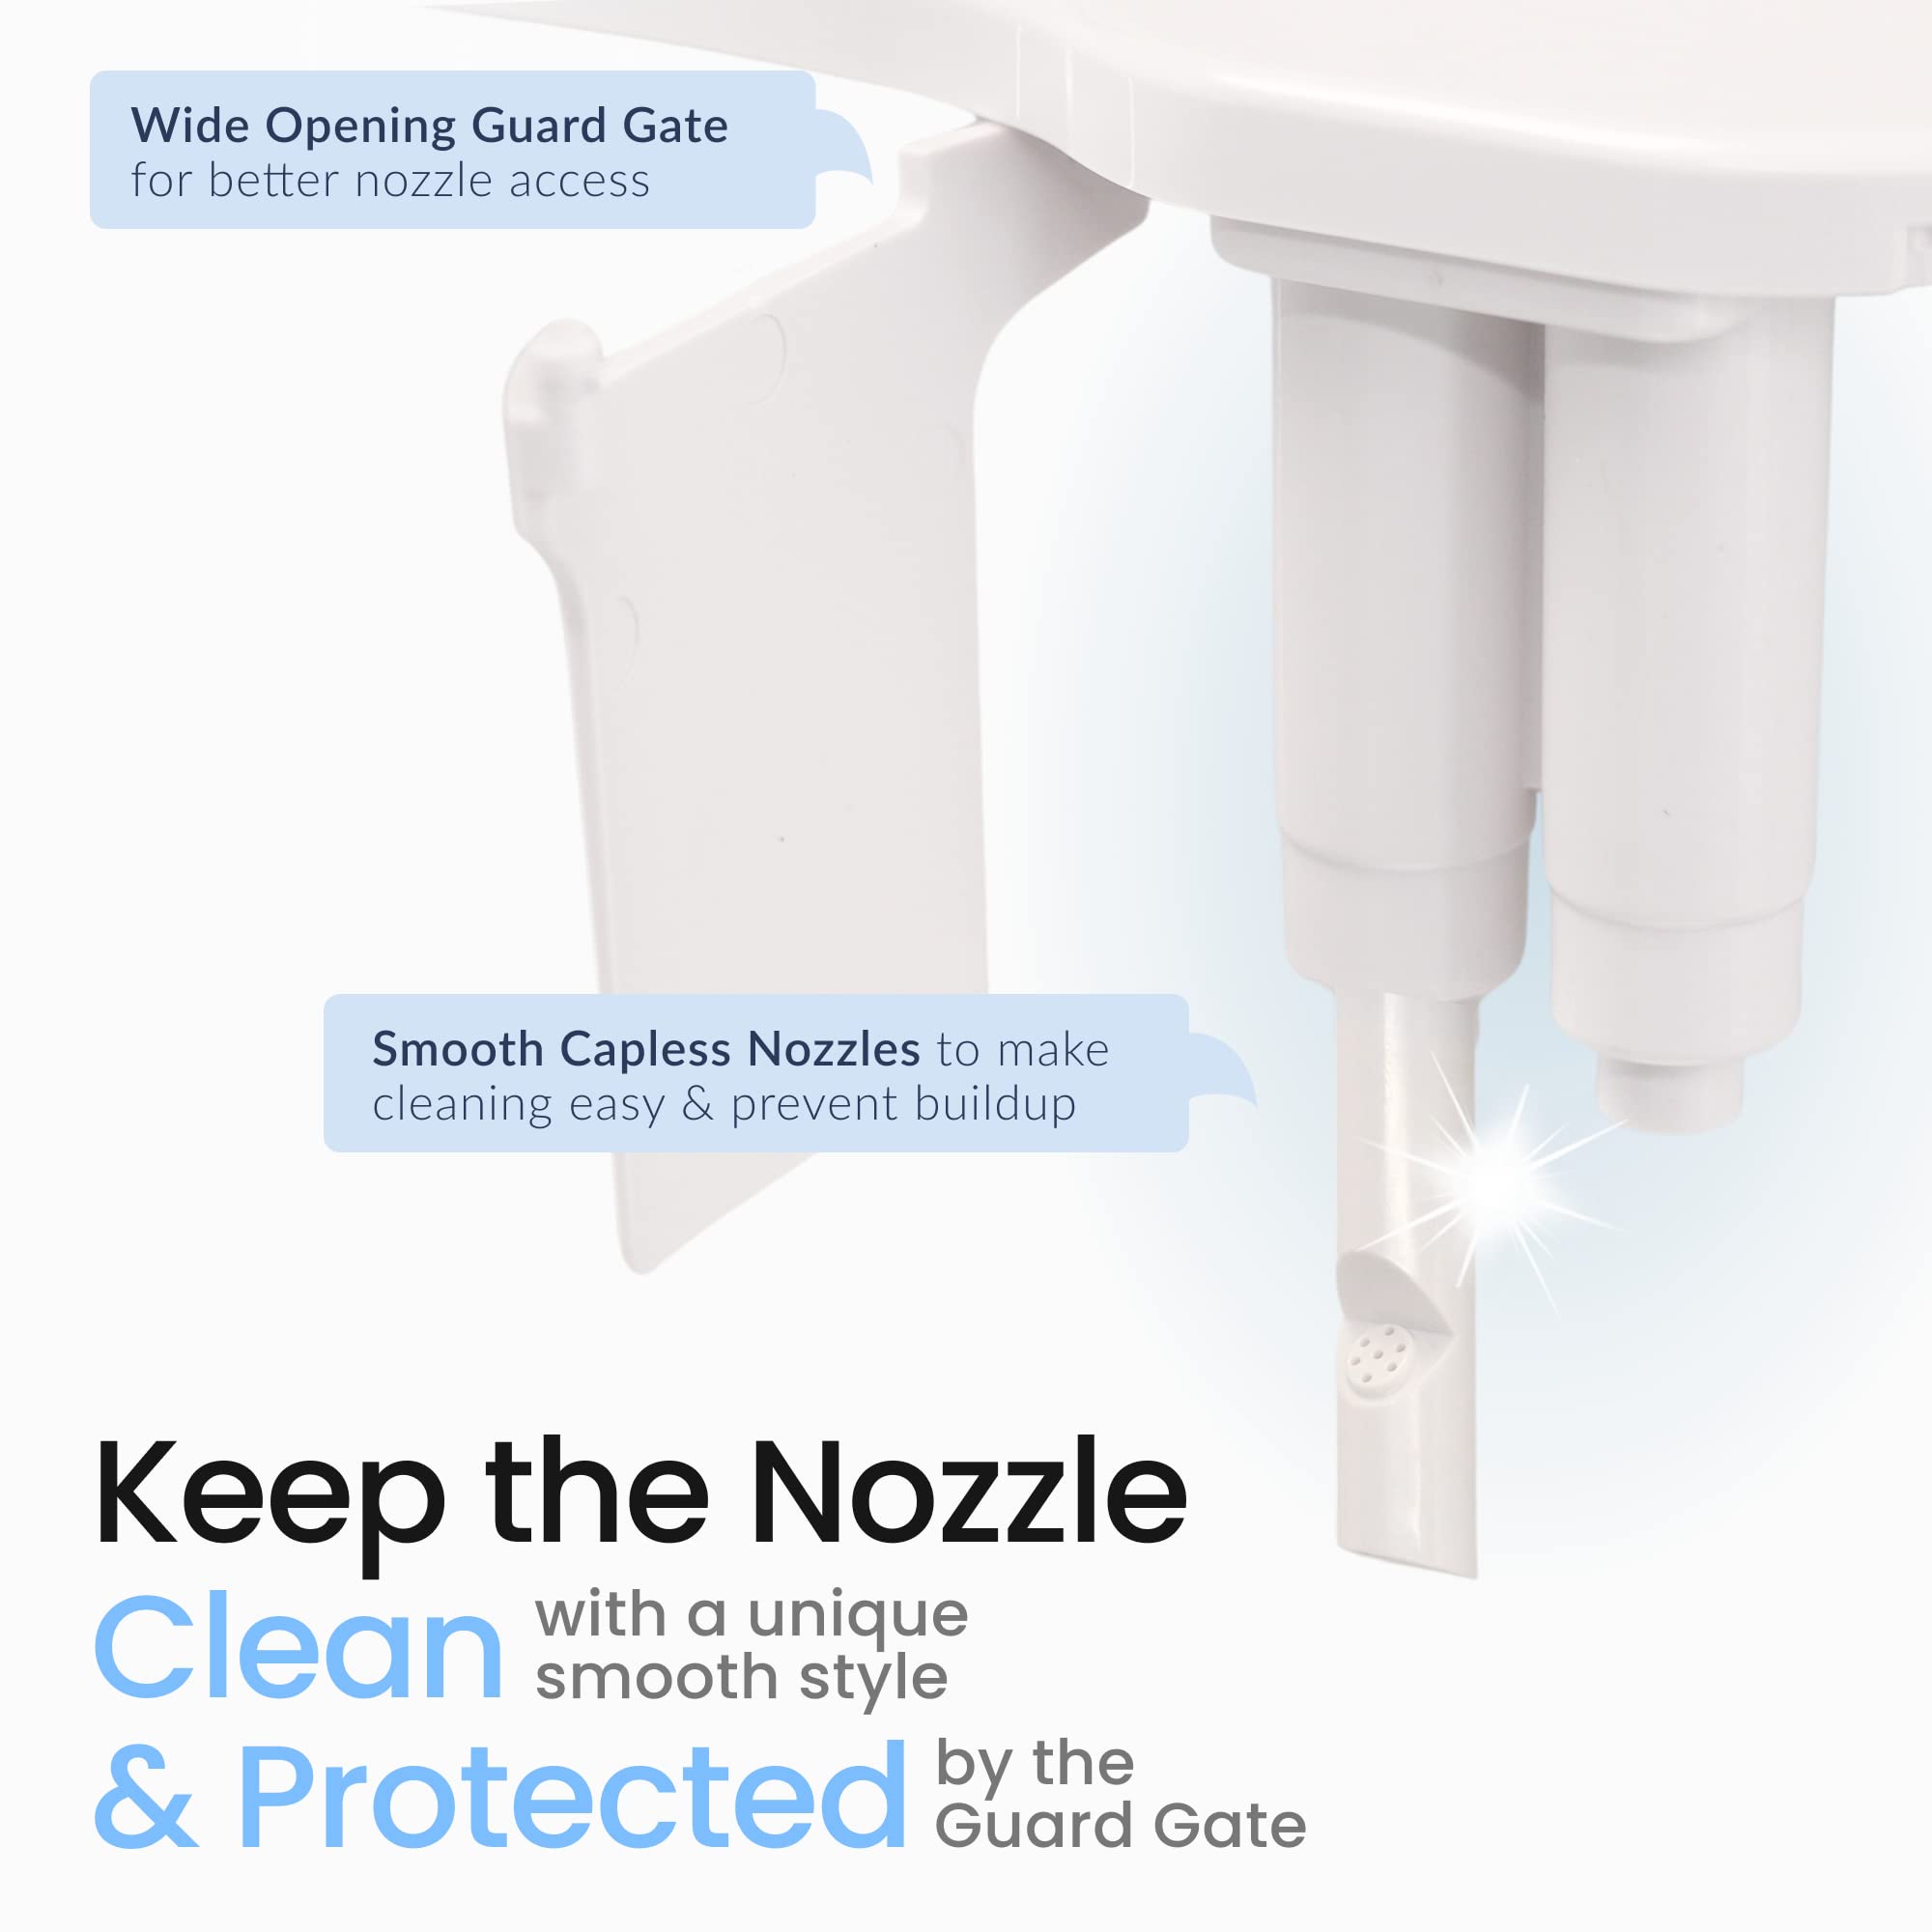 LUXE Bidet NEO 320 Plus – Next-Generation Warm Water Bidet Toilet Seat Attachment with Innovative EZ-Lift Hinges, Dual Nozzles, and 360° Self-Cleaning Mode (Chrome)